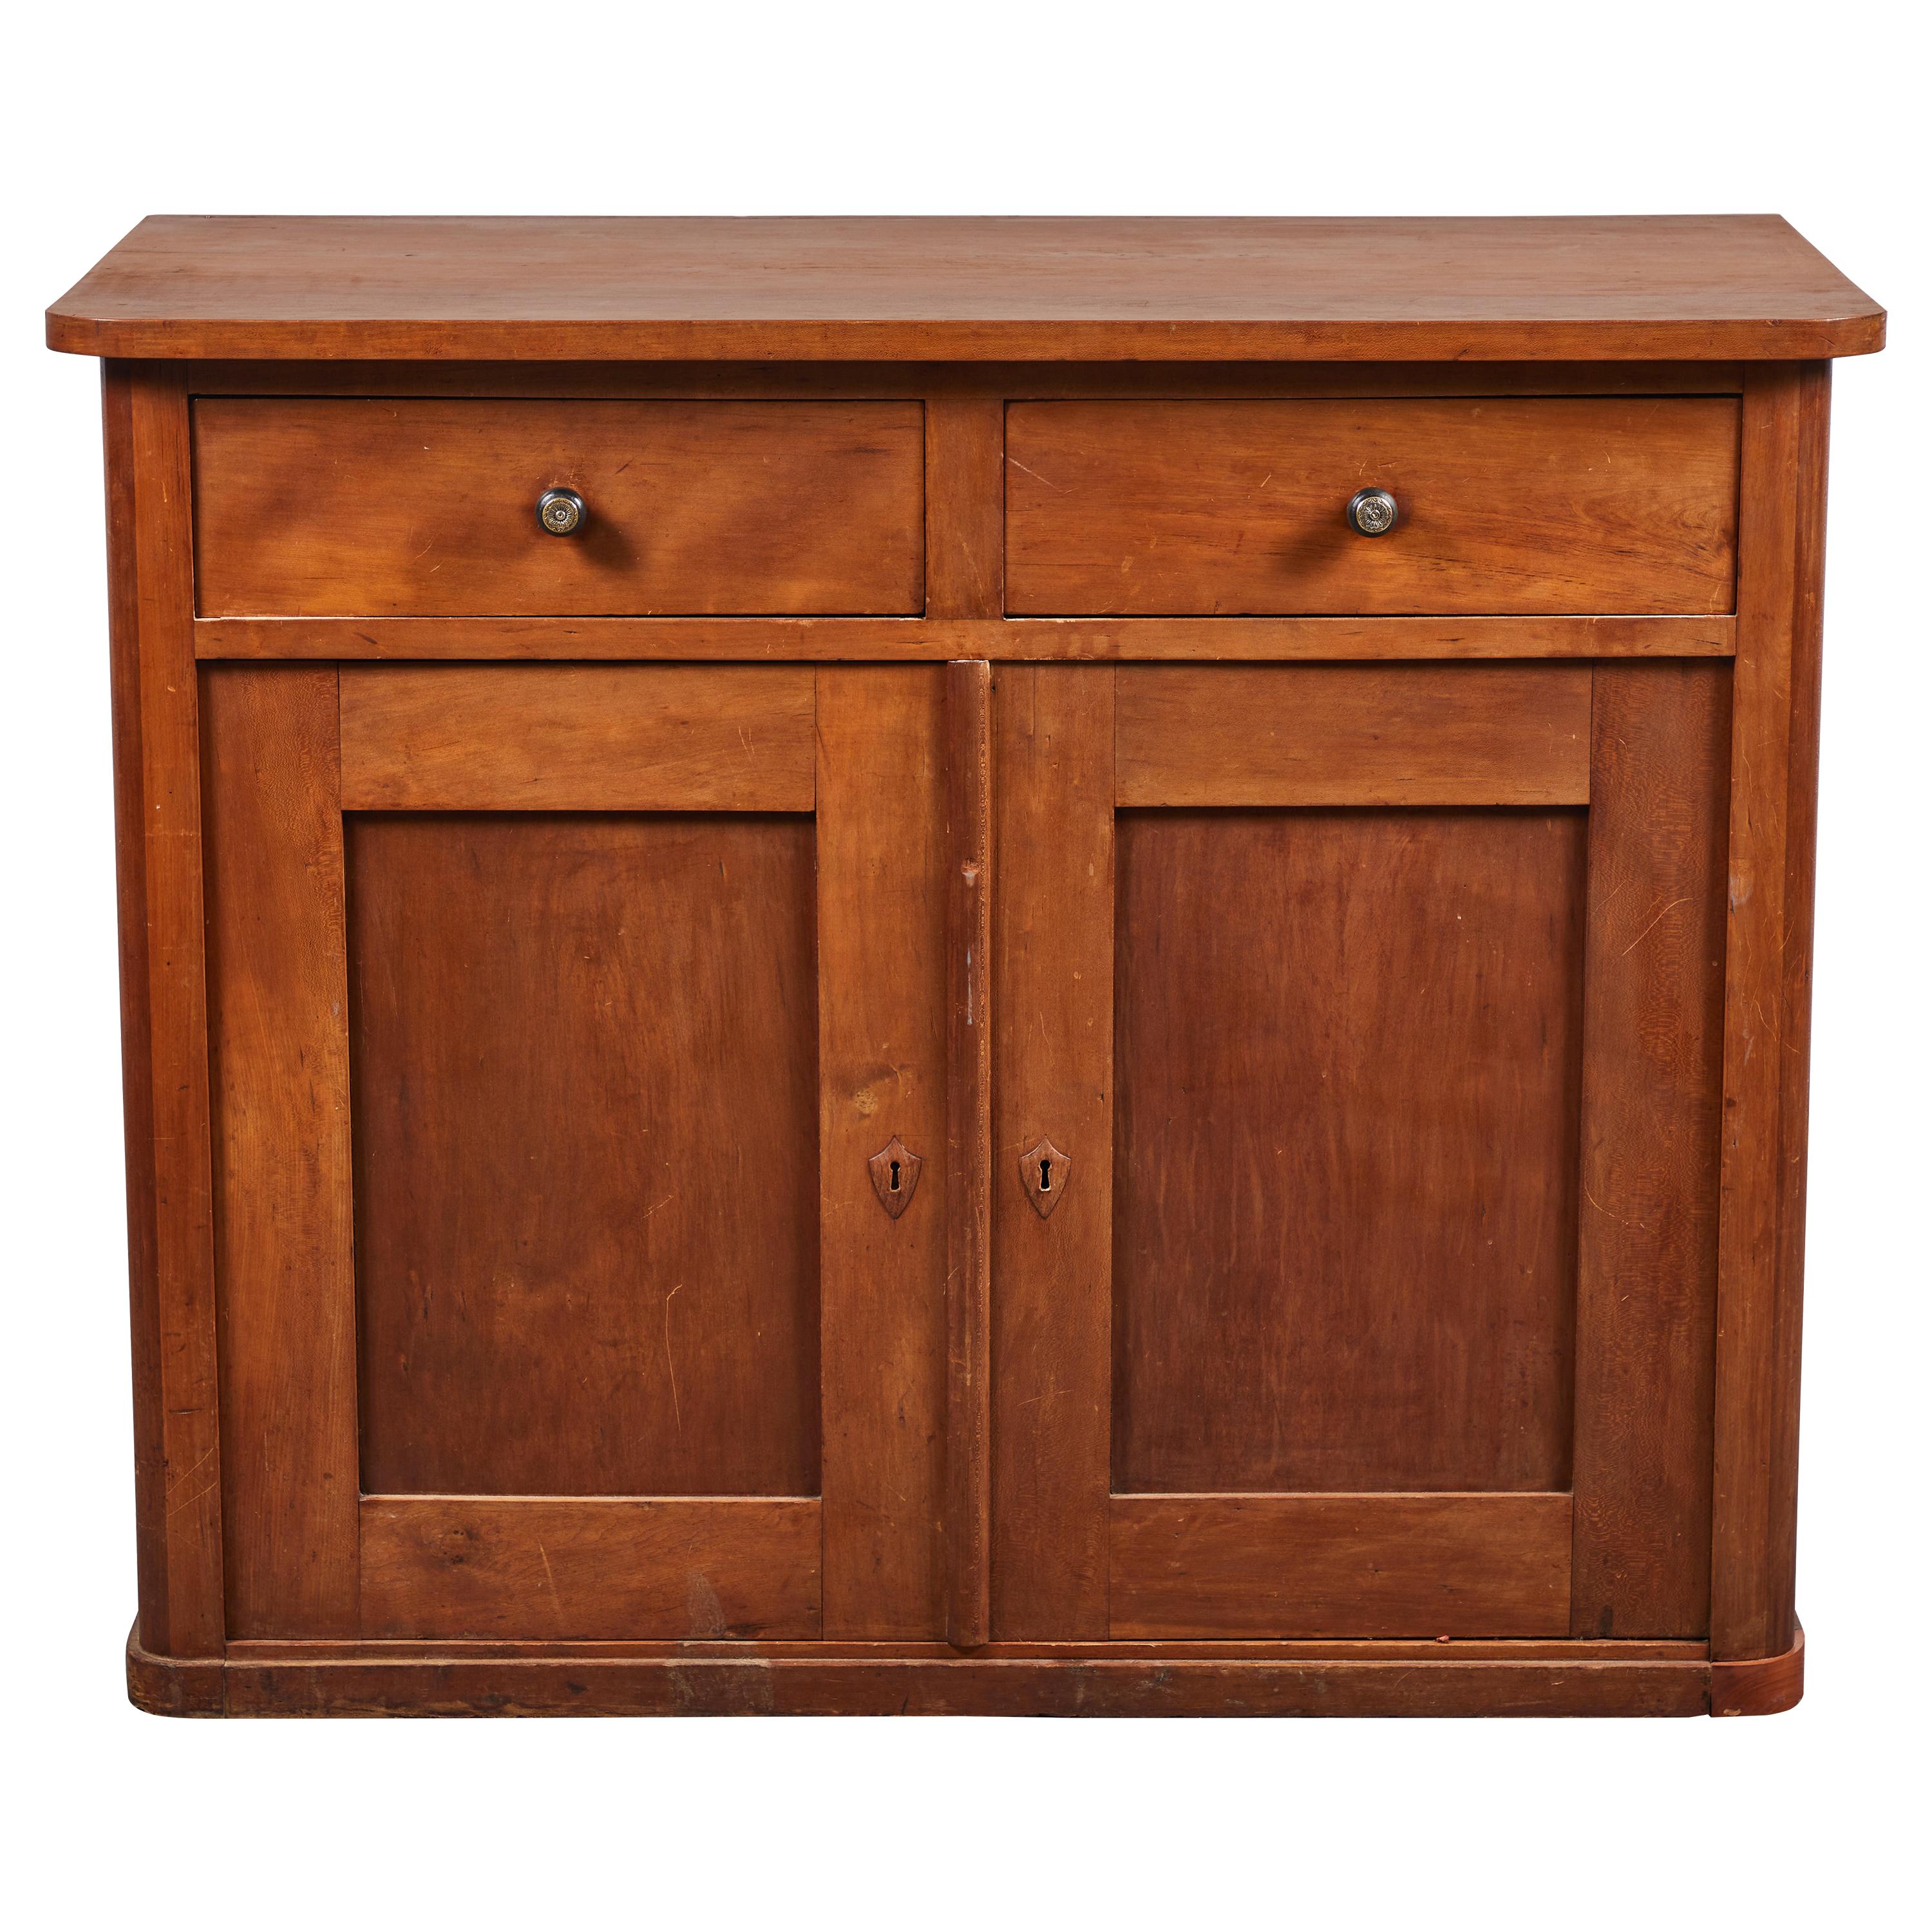 Early American Cherry Two Door Two Drawer Cabinet